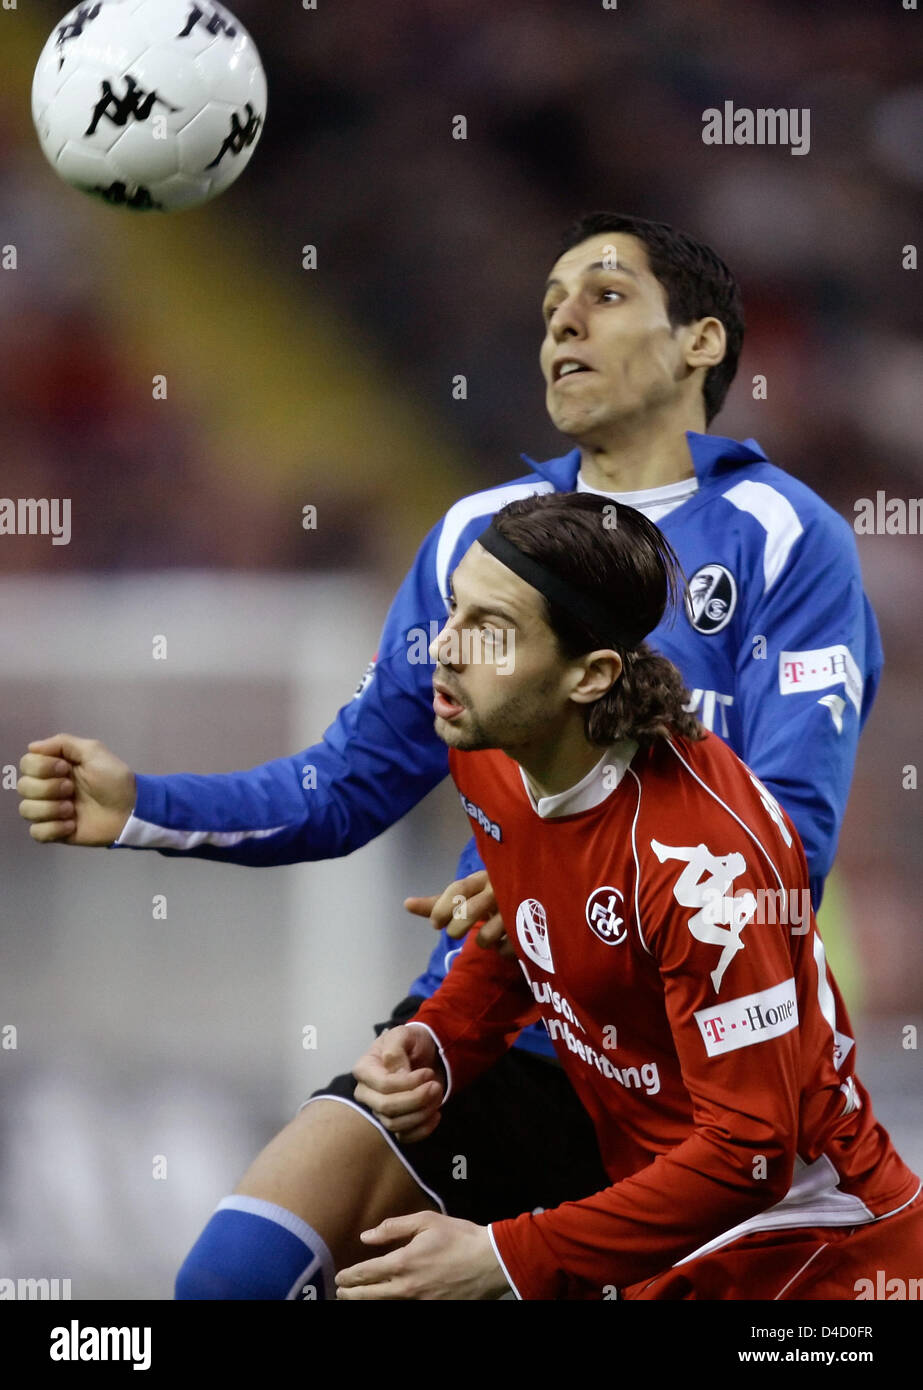 Benjamin Weigelt of Kaiserslautern (front) and Freiburg's Karim Matmour (back) vie for the ball in the Bundesliga 2nd division match 1.FC Kaiserslautern v SC Freiburg at Fritz Walter stadium of Kaiserslautern, Germany, 07 March 2008. Photo: RONALD WITTEK   (ATTENTION: EMBARGO CONDITIONS! The DFL permits the further utilisation of the pictures in IPTV, mobile services and other new  Stock Photo